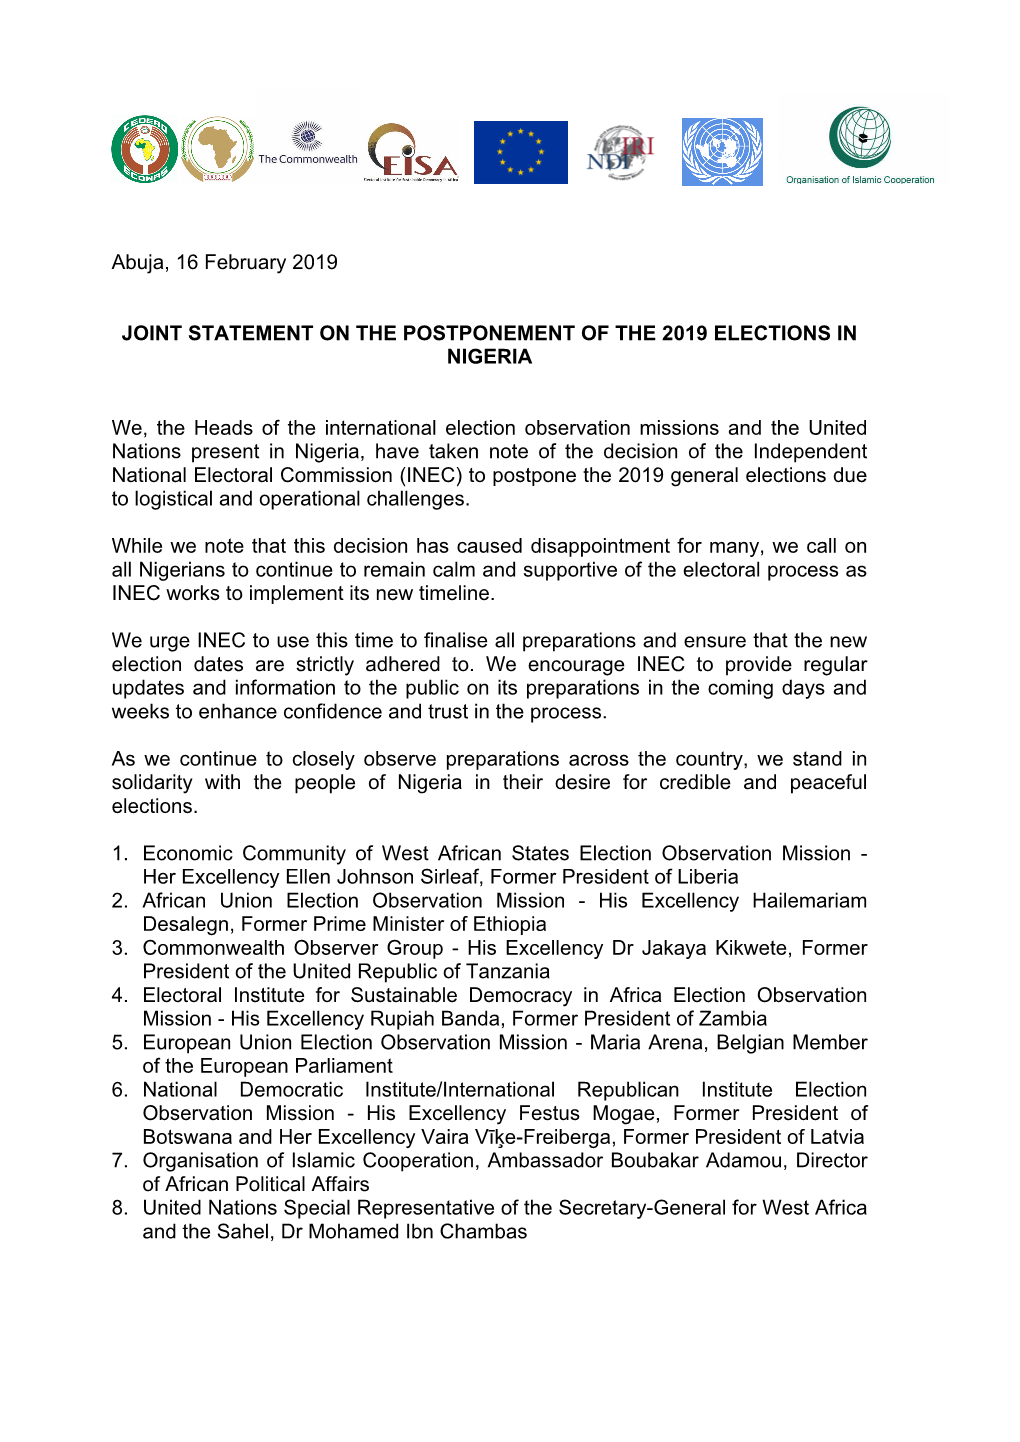 Joint Statement on the Postponement of the 2019 Elections in Nigeria